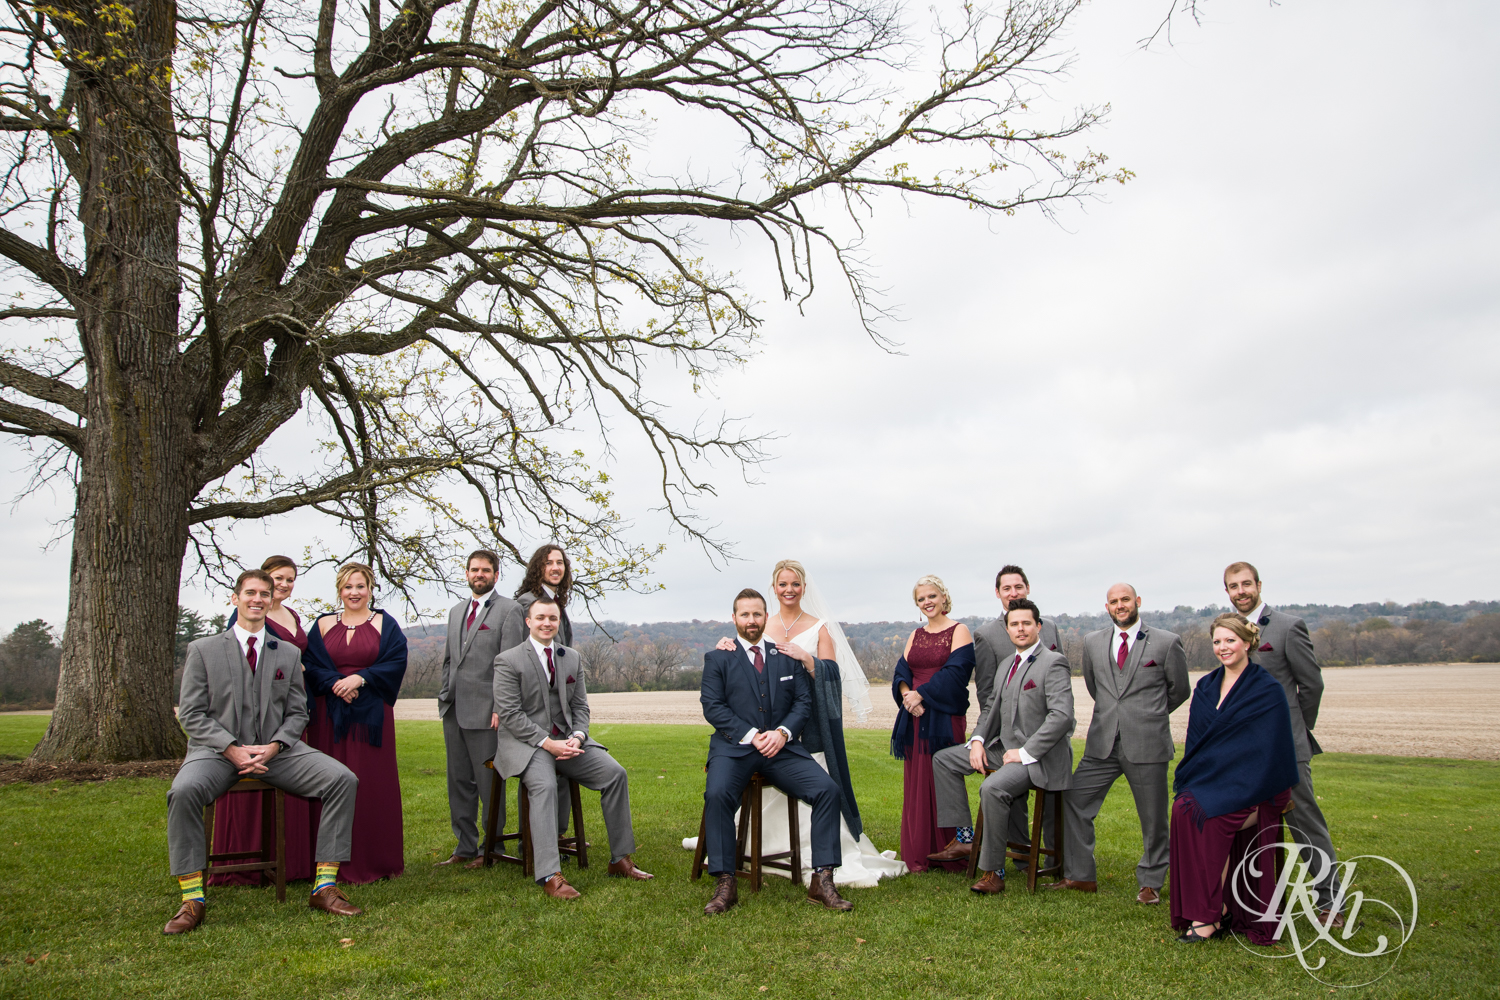 Wedding party smile under tree at Mayowood Stone Barn in Rochester, Minnesota.